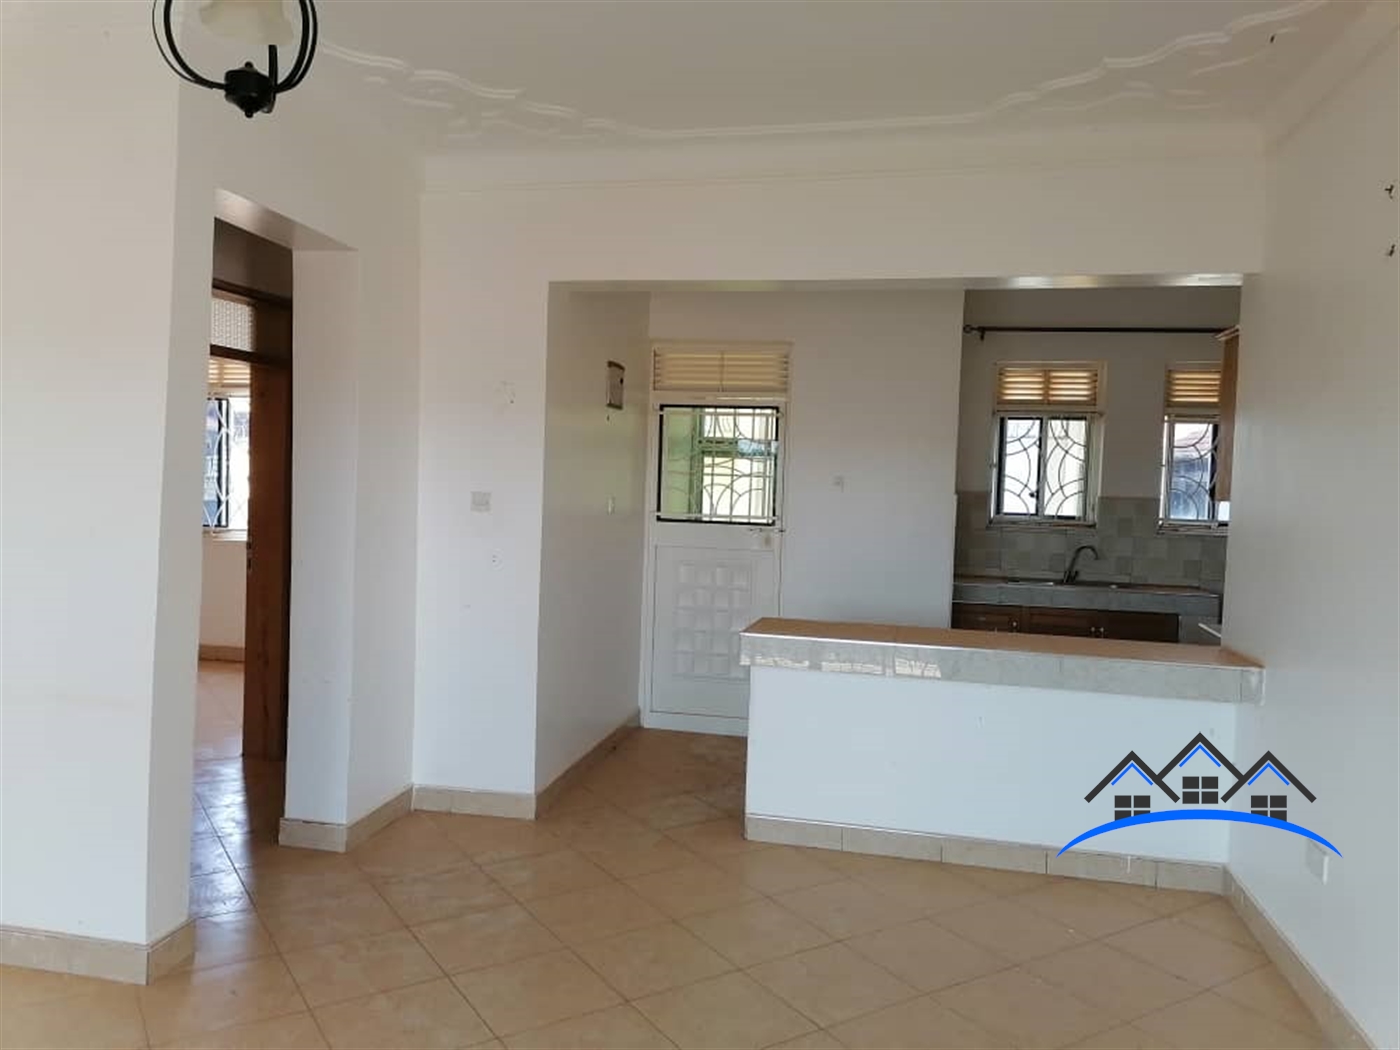 Rental units for sale in Nsasa Wakiso